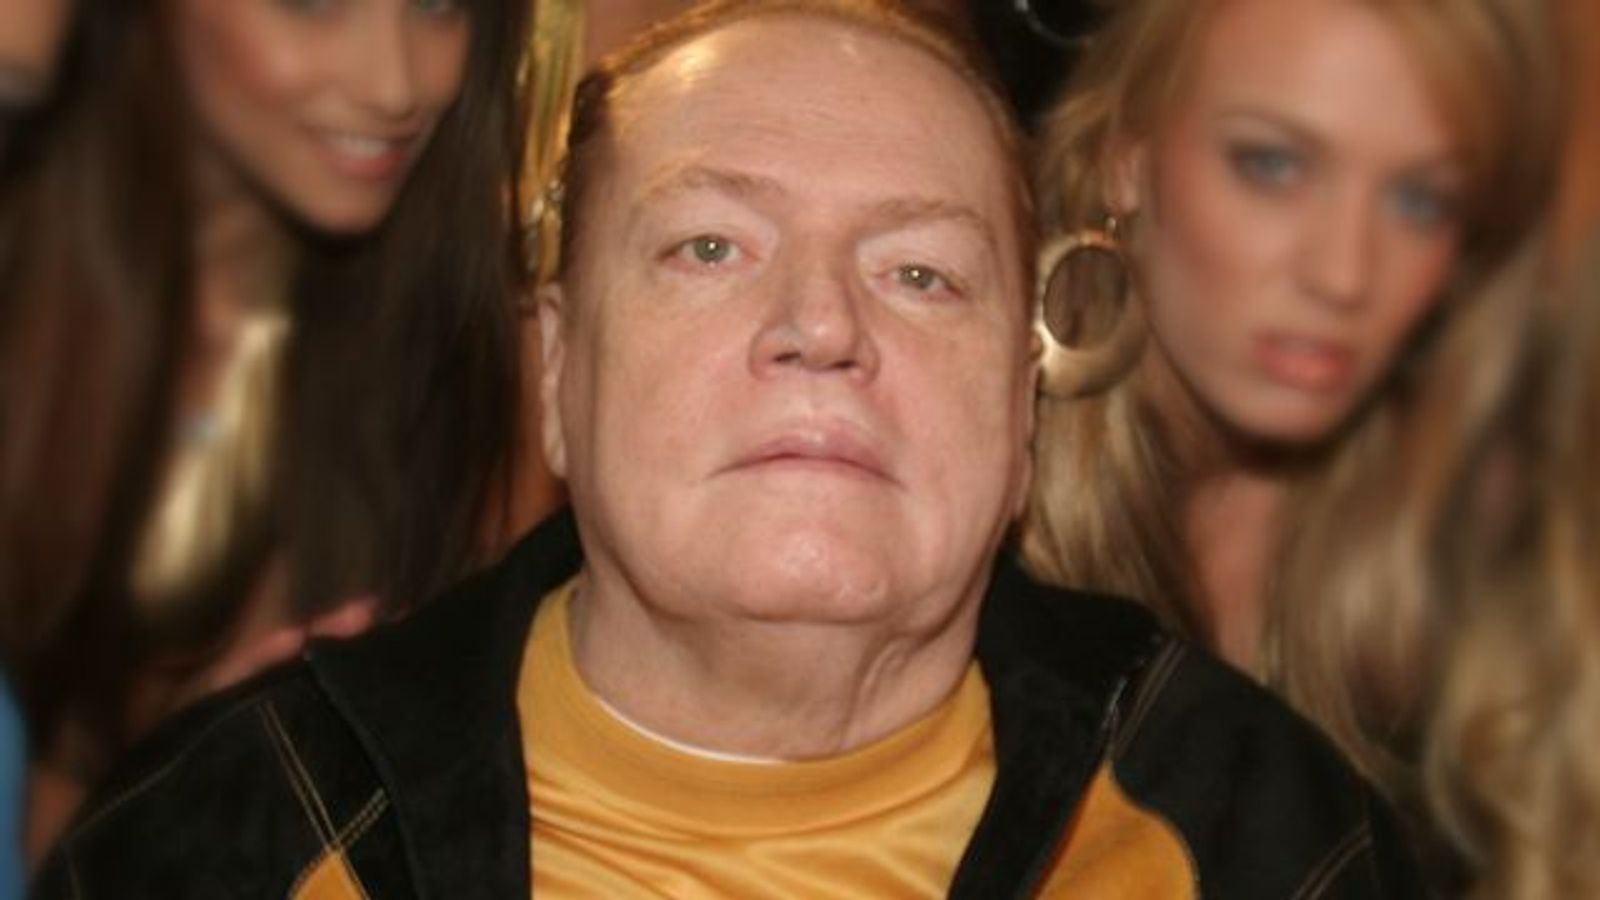 ACLU Files Motion for Larry Flynt in Franklin Execution Case